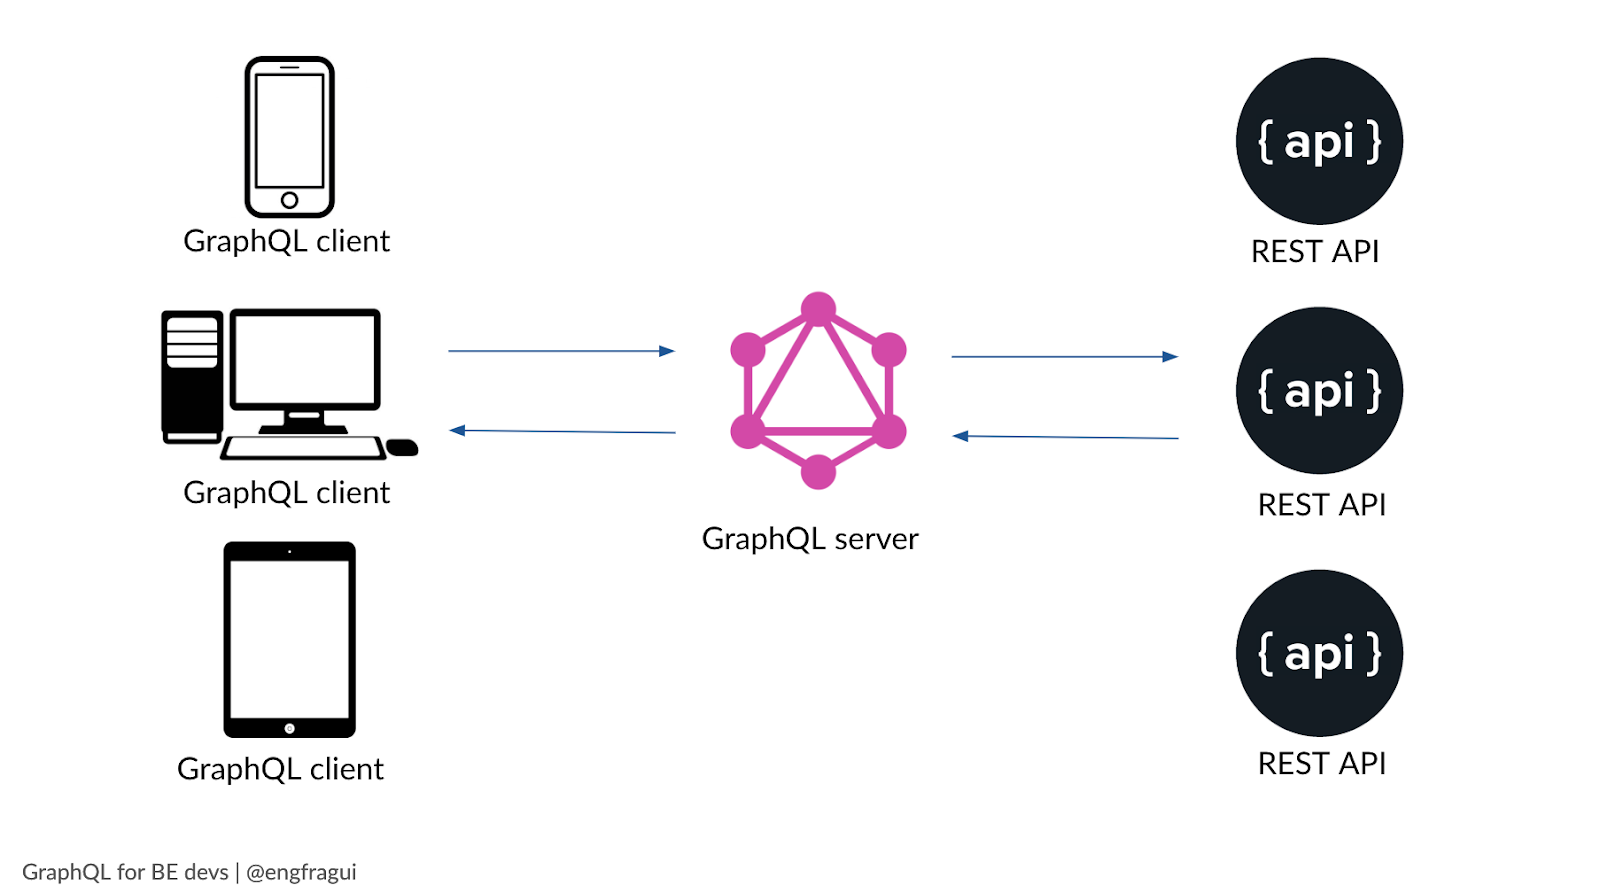 GraphQL architecture graphic - connection between graphql client, server, and multiple rest apis